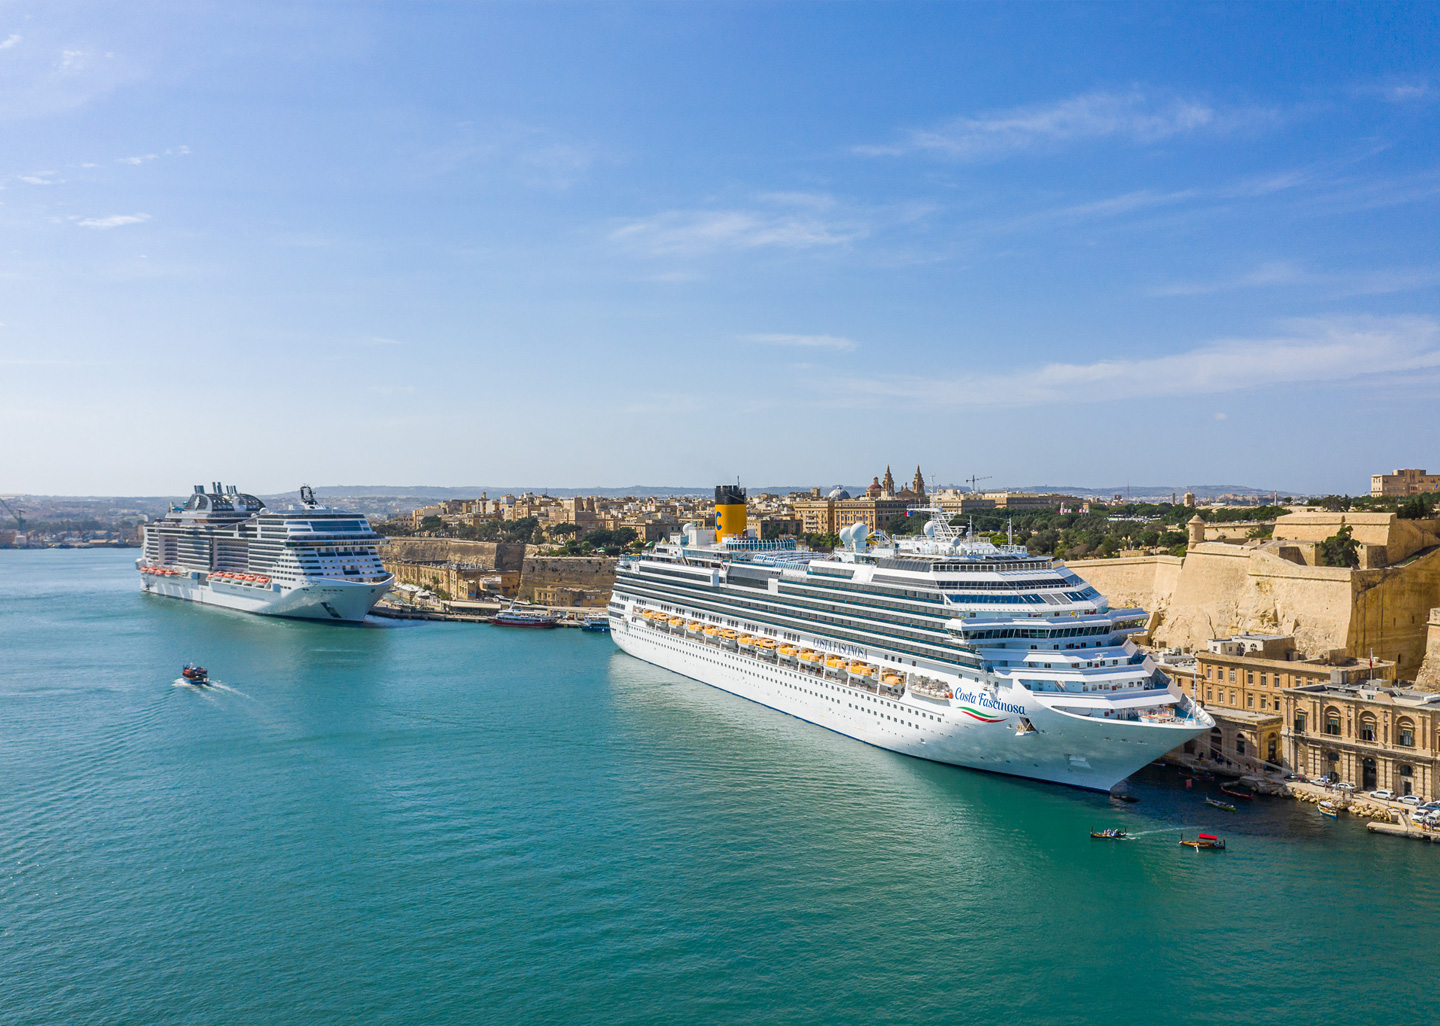 Valletta Cruise Port nominated for World's Best Cruise Terminal for Sustainability 2022 and Europe's Best Cruise Terminal 2022